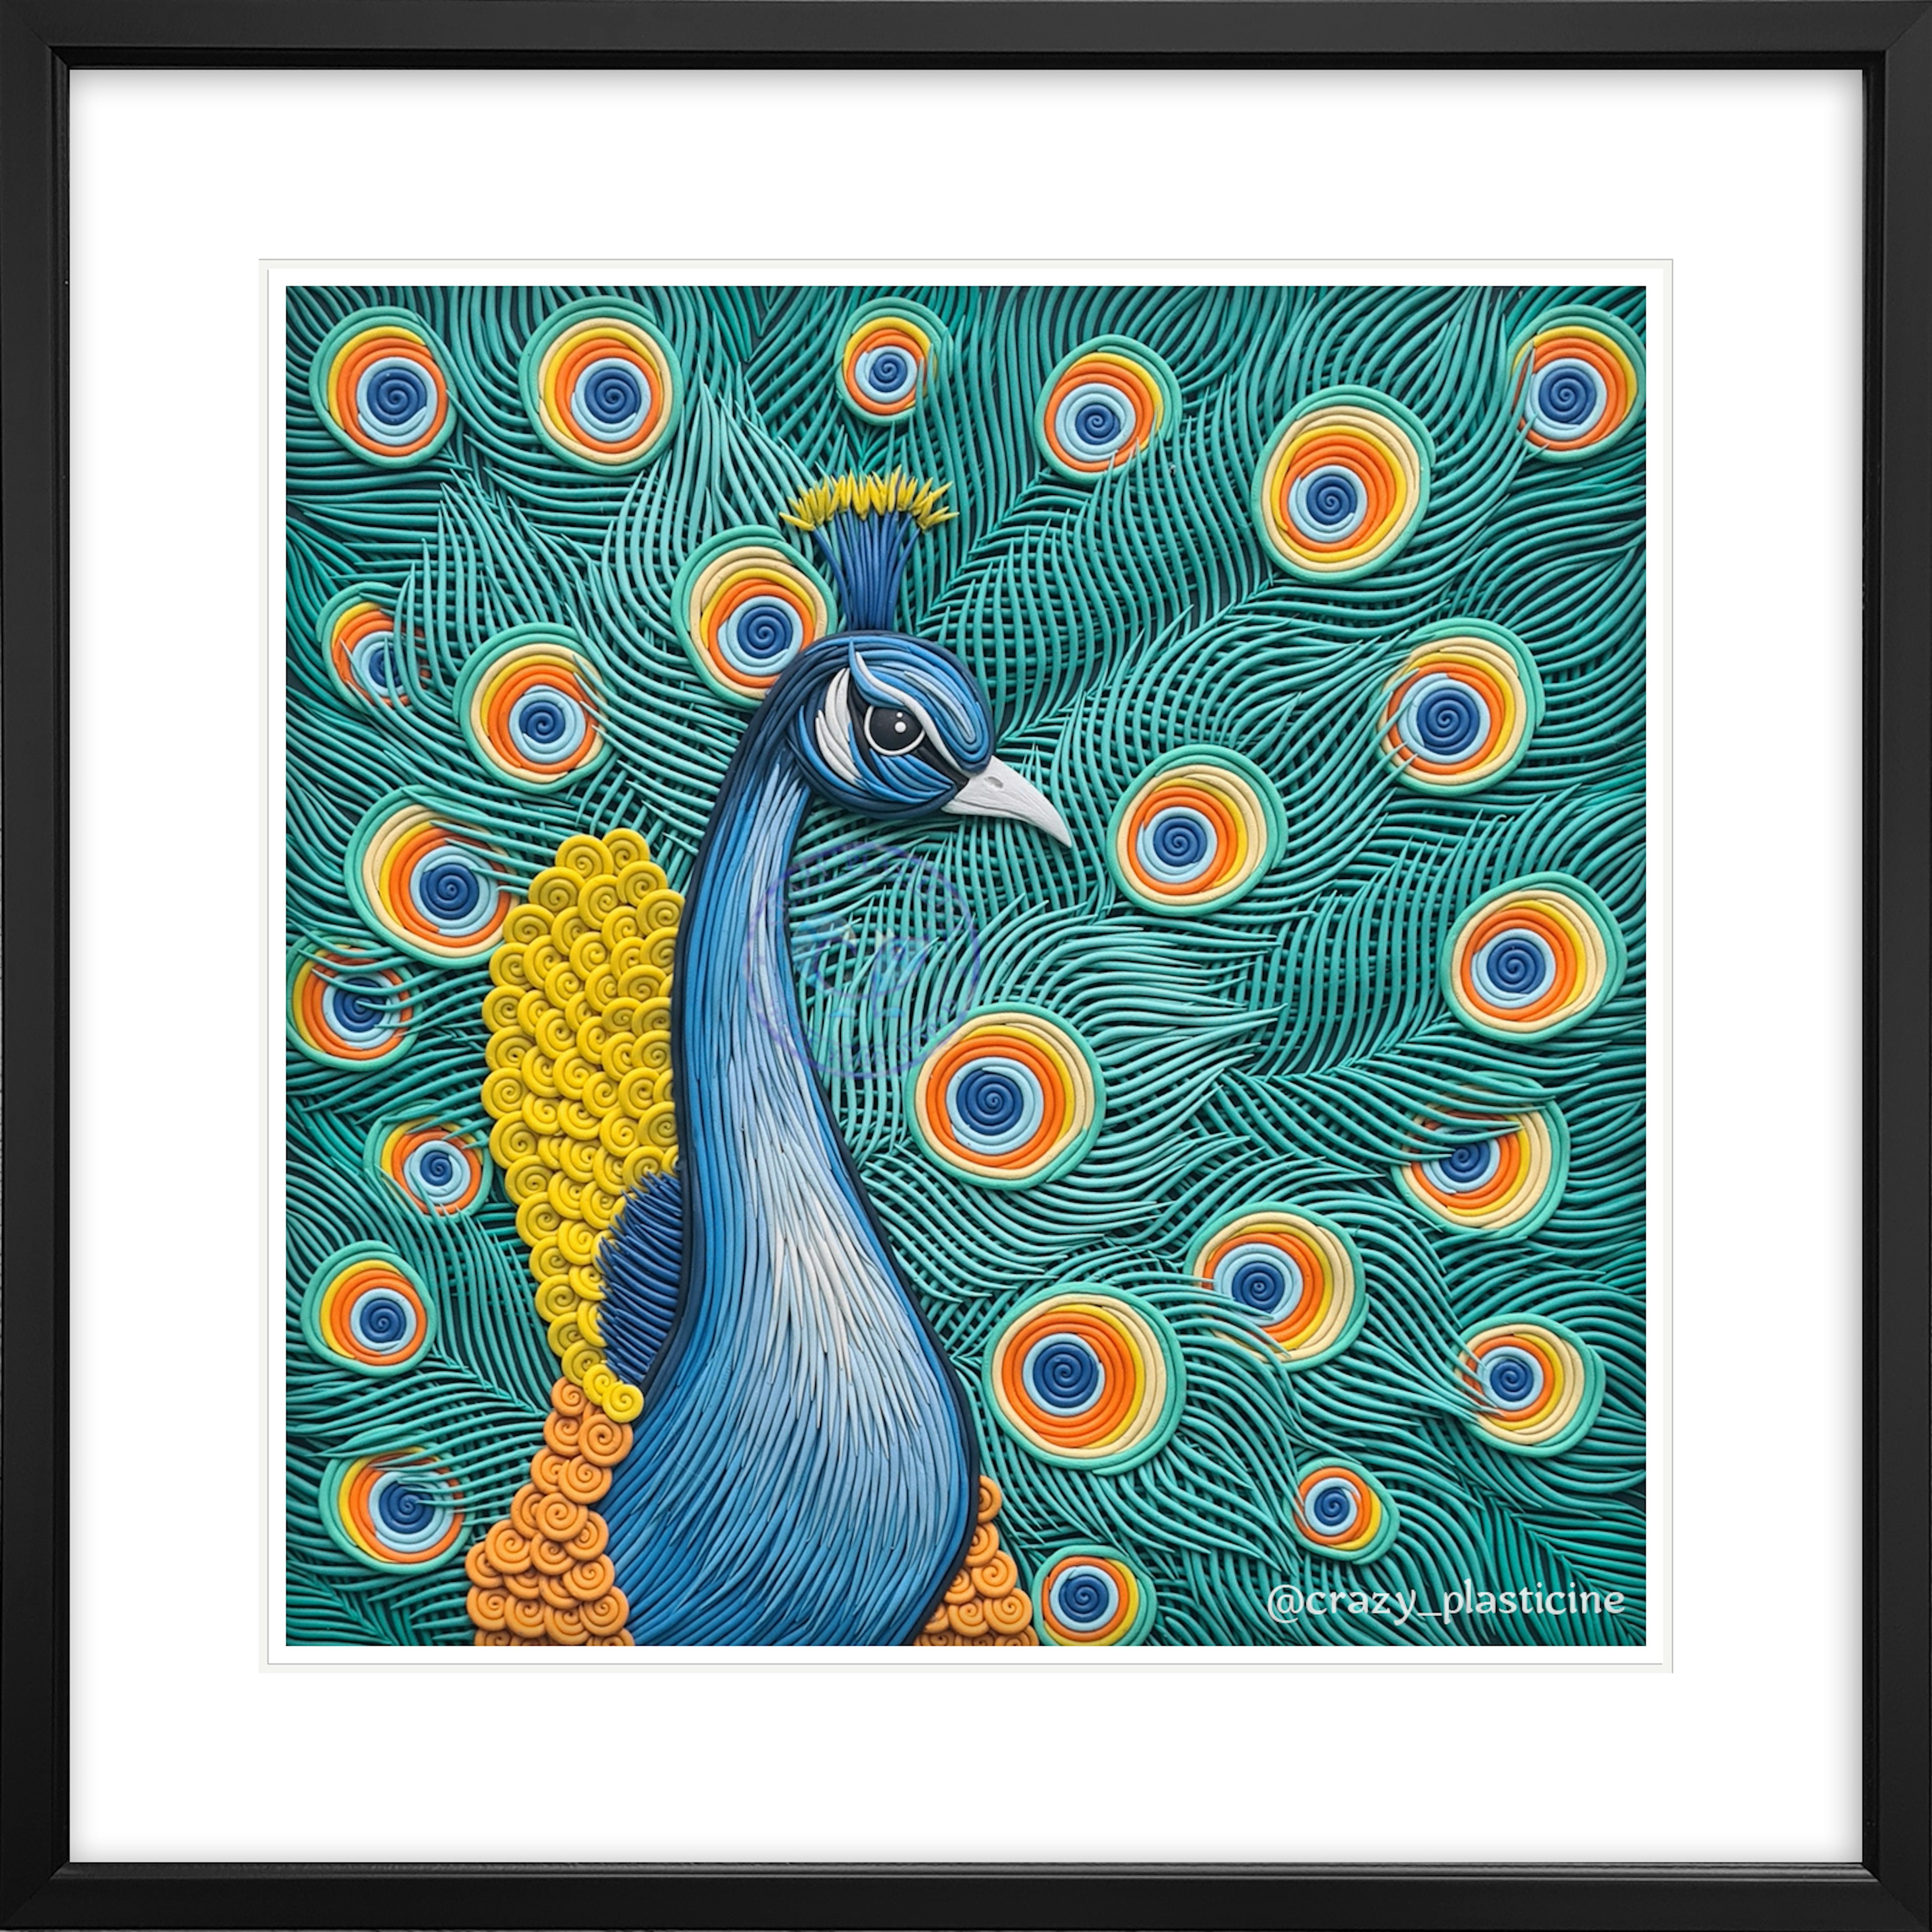 Main image for Peacock plasticine painting